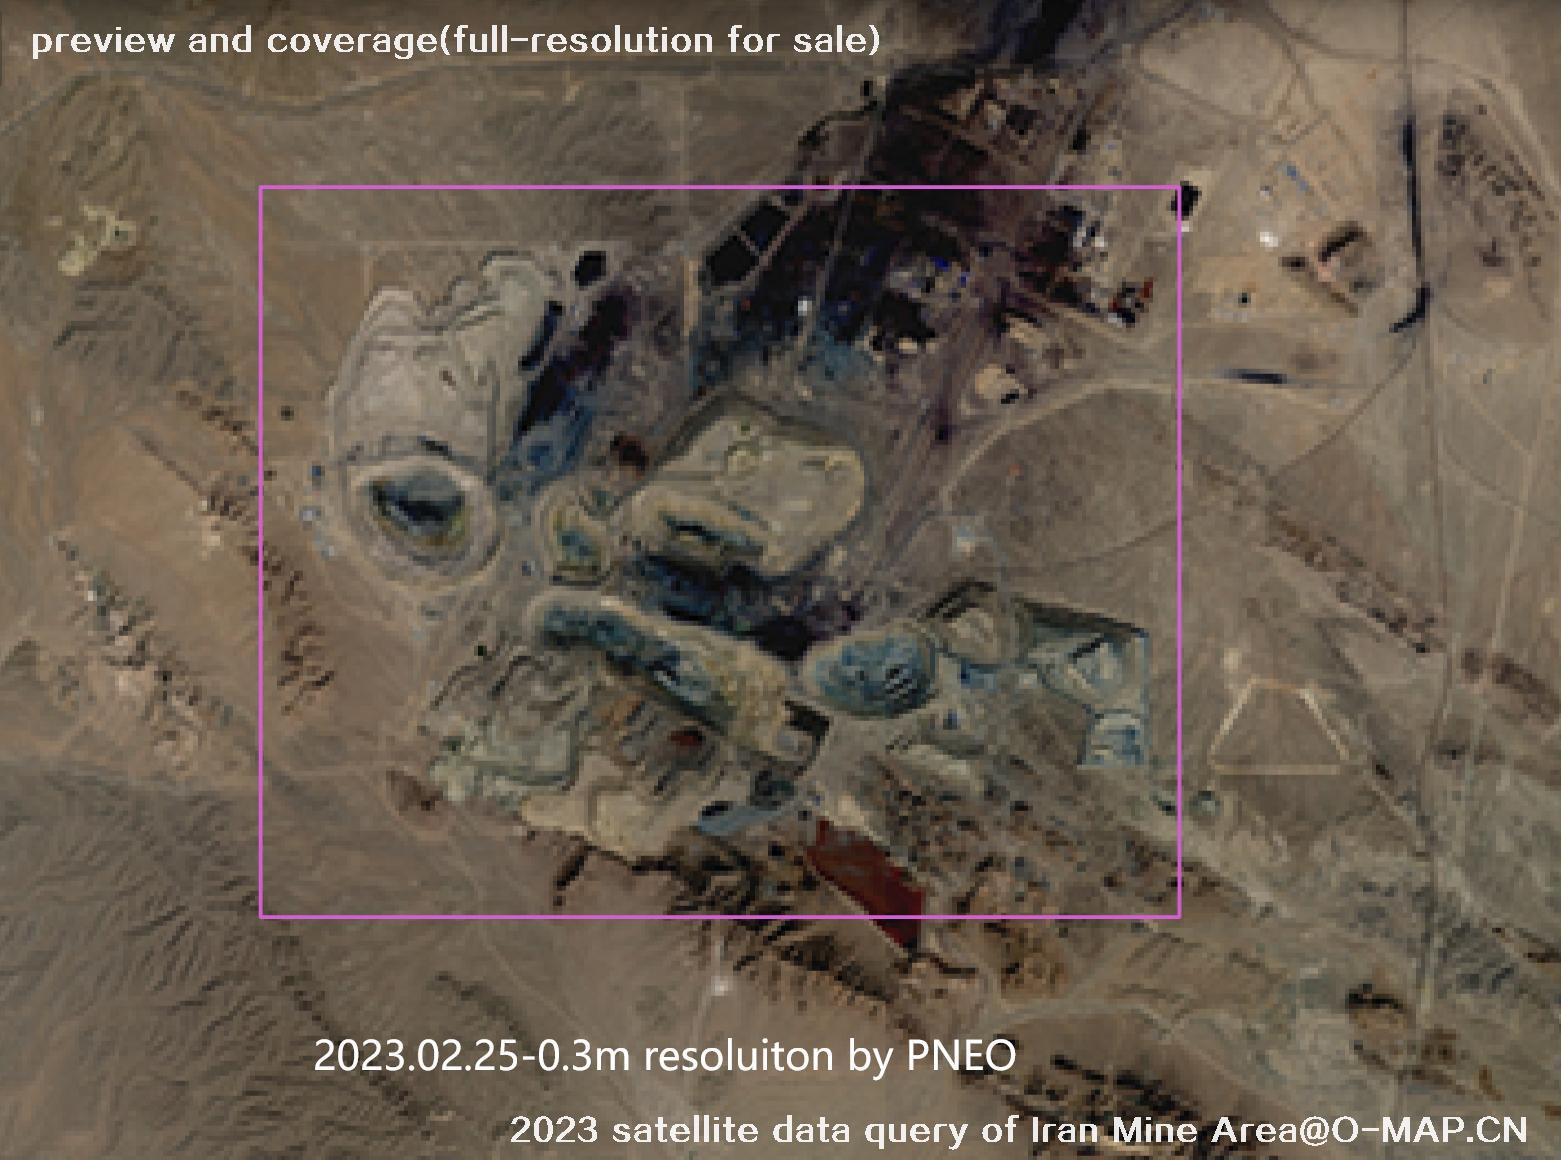 The 2023 satellite data query results of Iran Mine Area